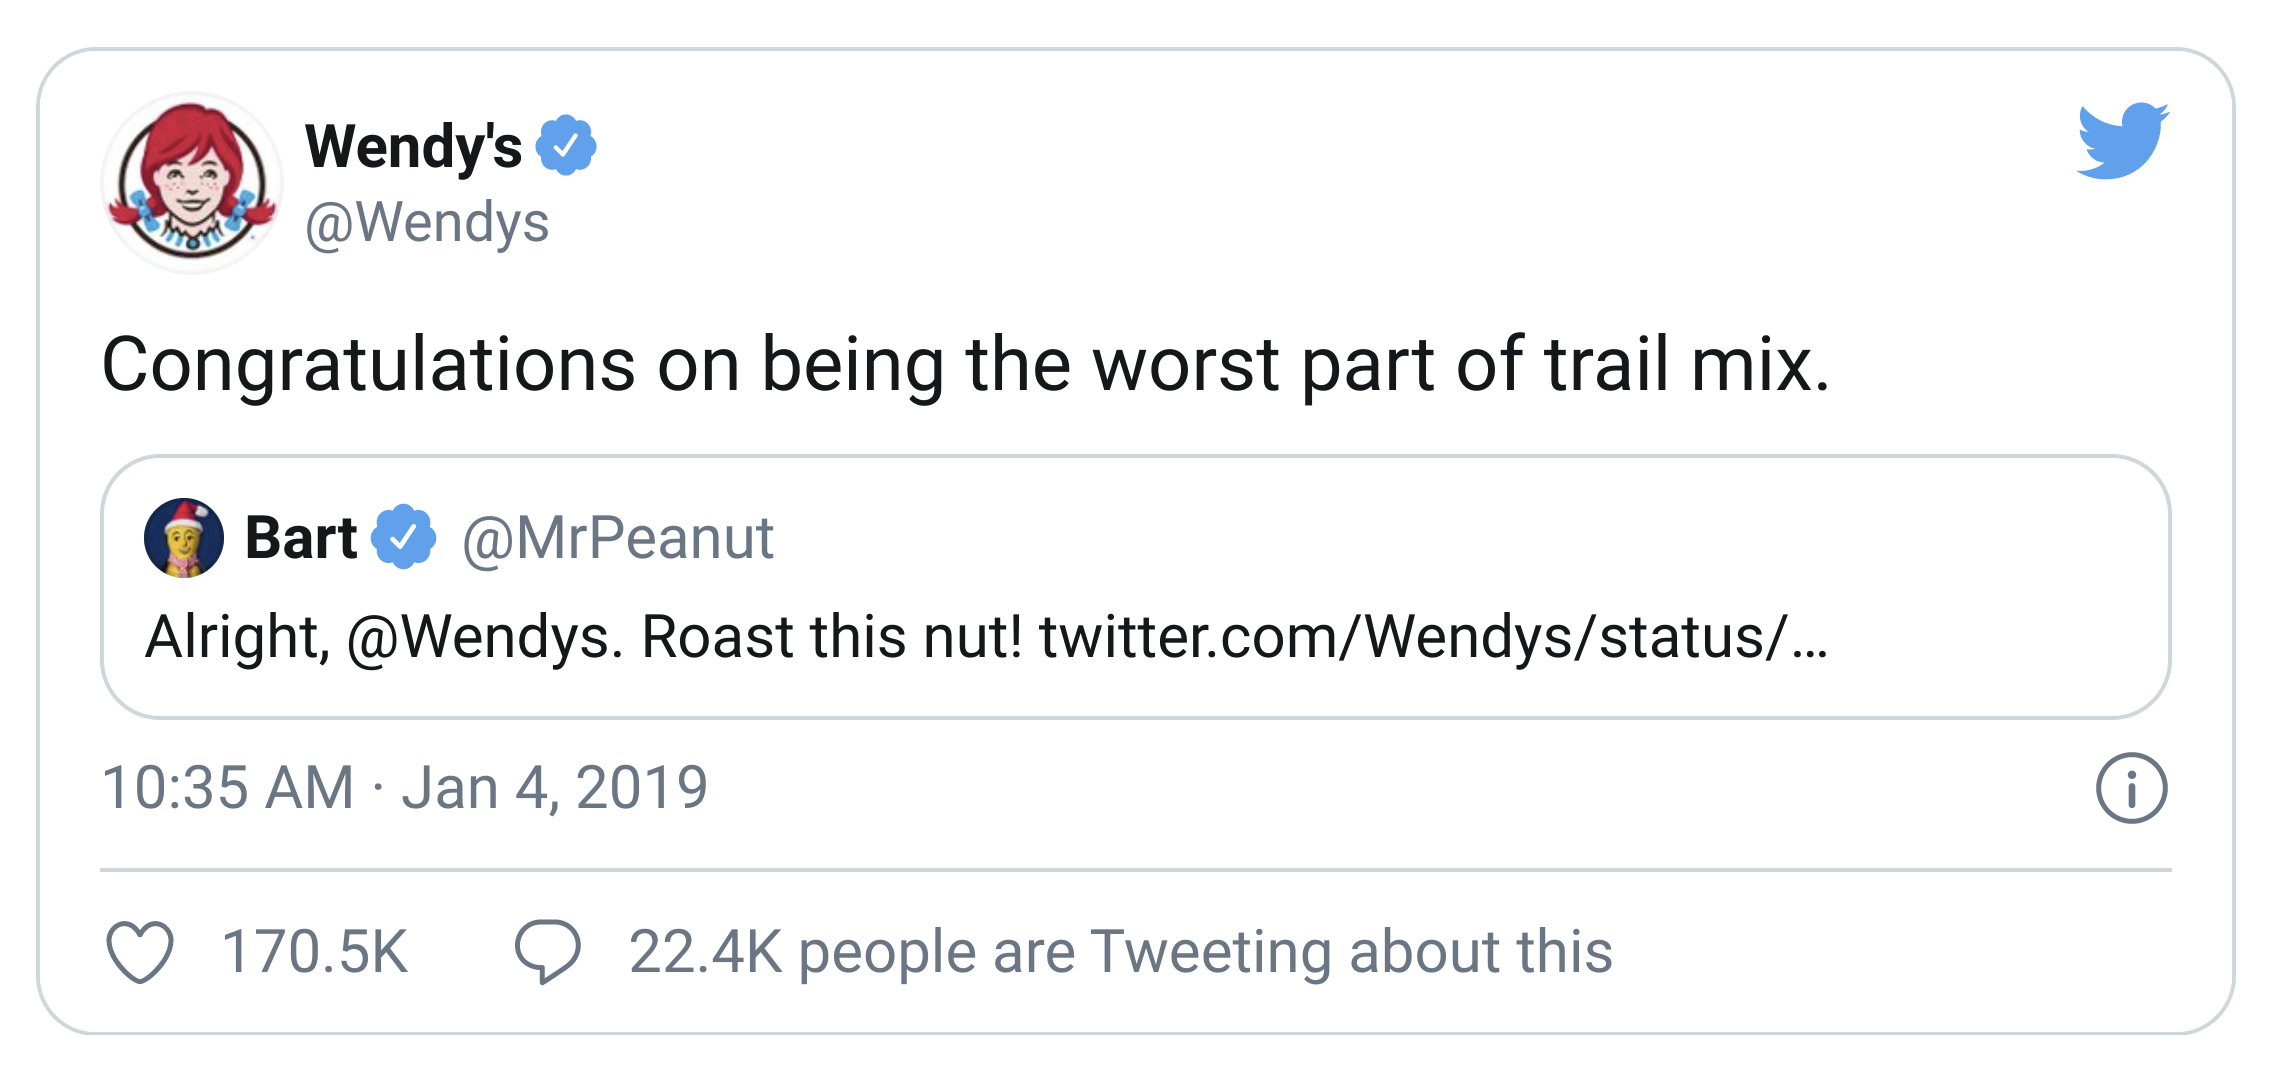 angle - Wendy's Congratulations on being the worst part of trail mix. Bart Alright, . Roast this nut! twitter.comWendysstatus... i people are Tweeting about this